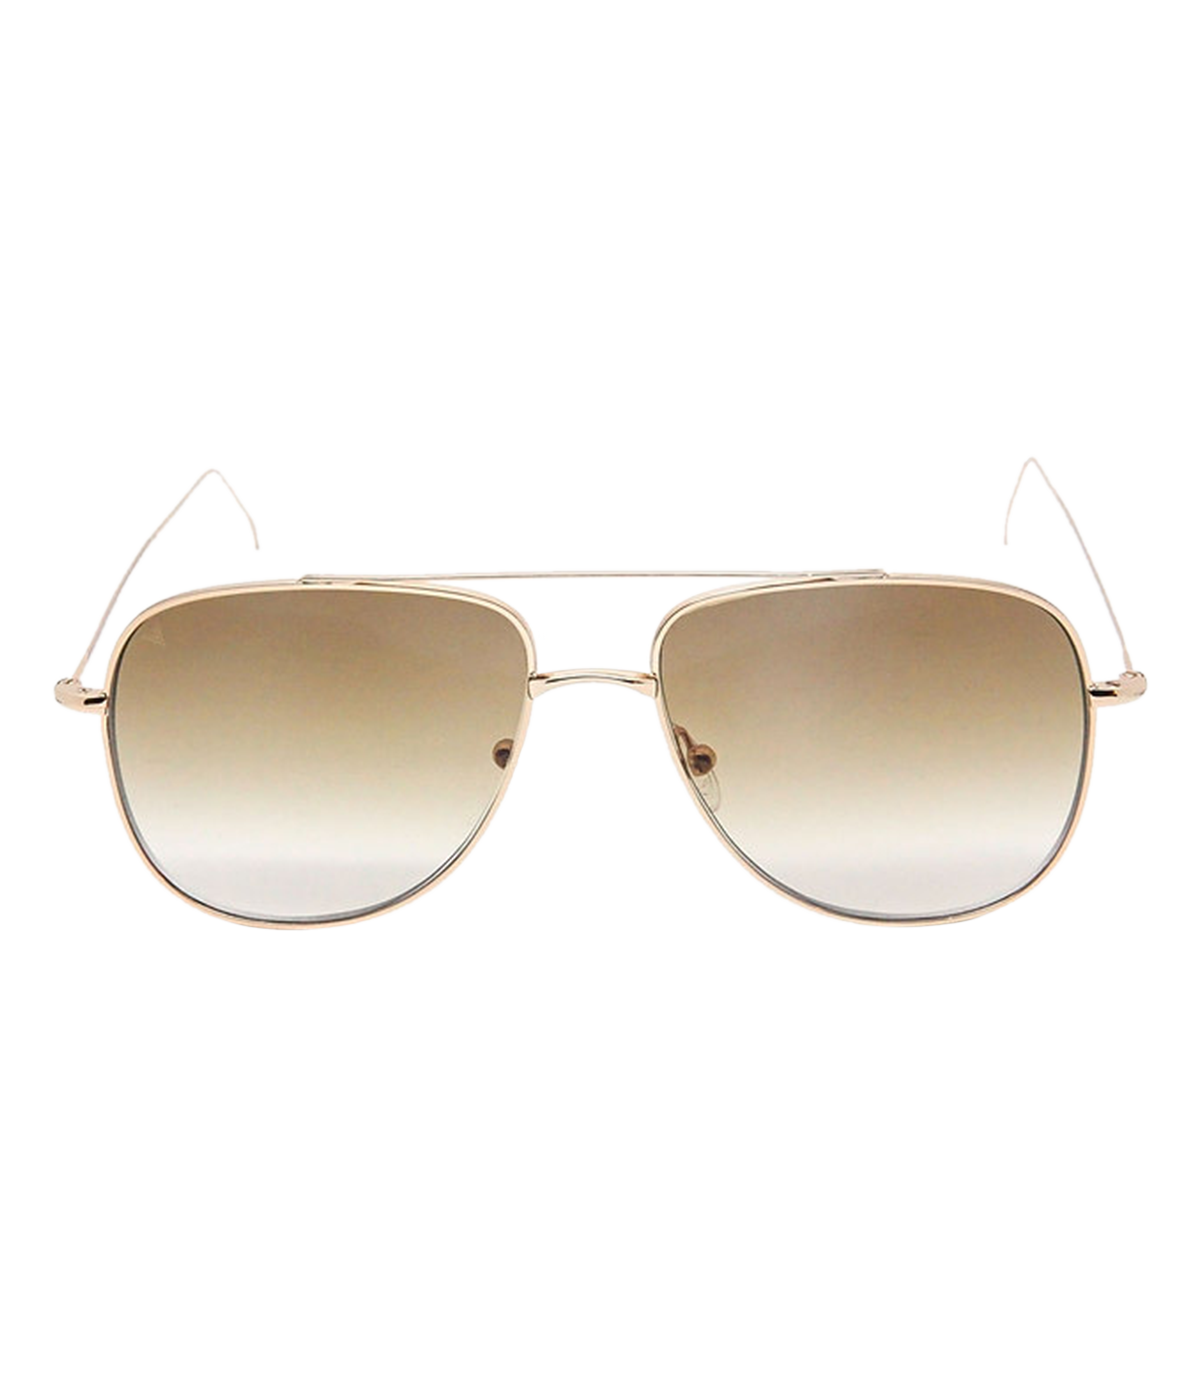 Danny Sunglasses in Shiny Red Gold & Brown Decade